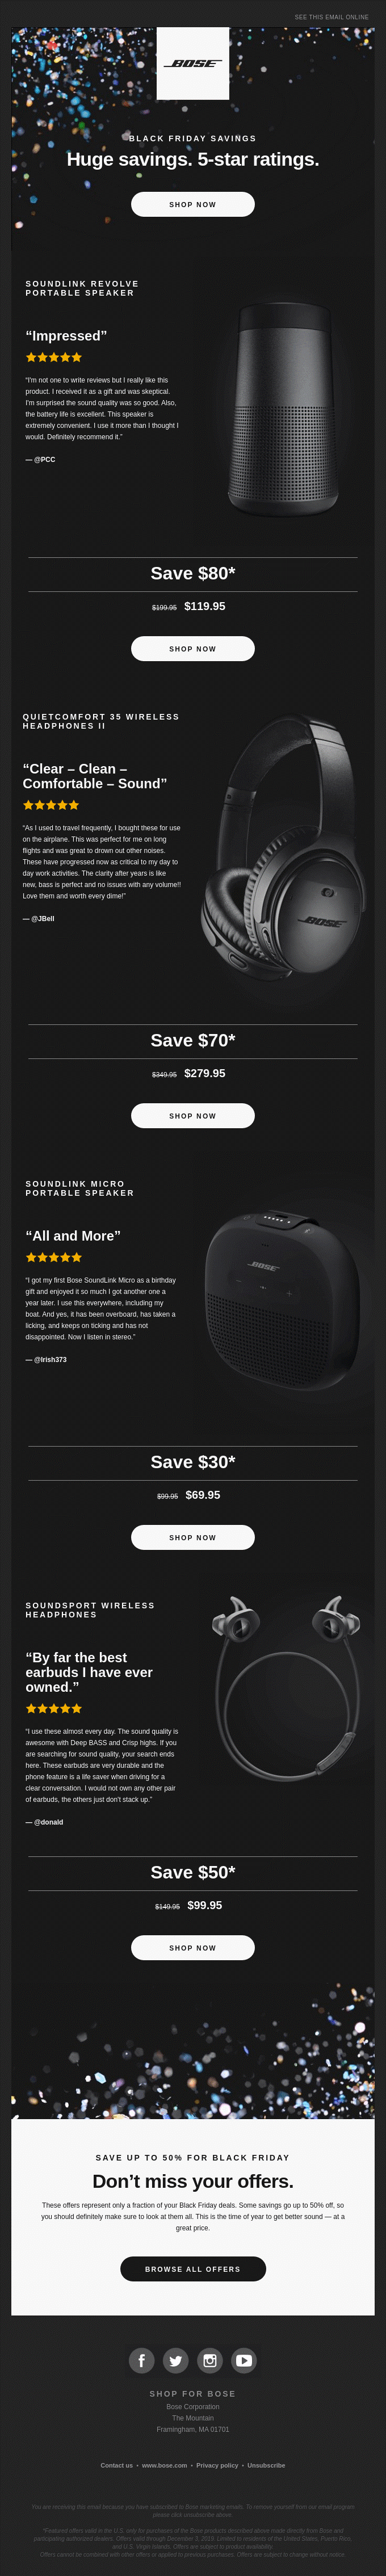 Bose uses testimonials in a Black Friday email.